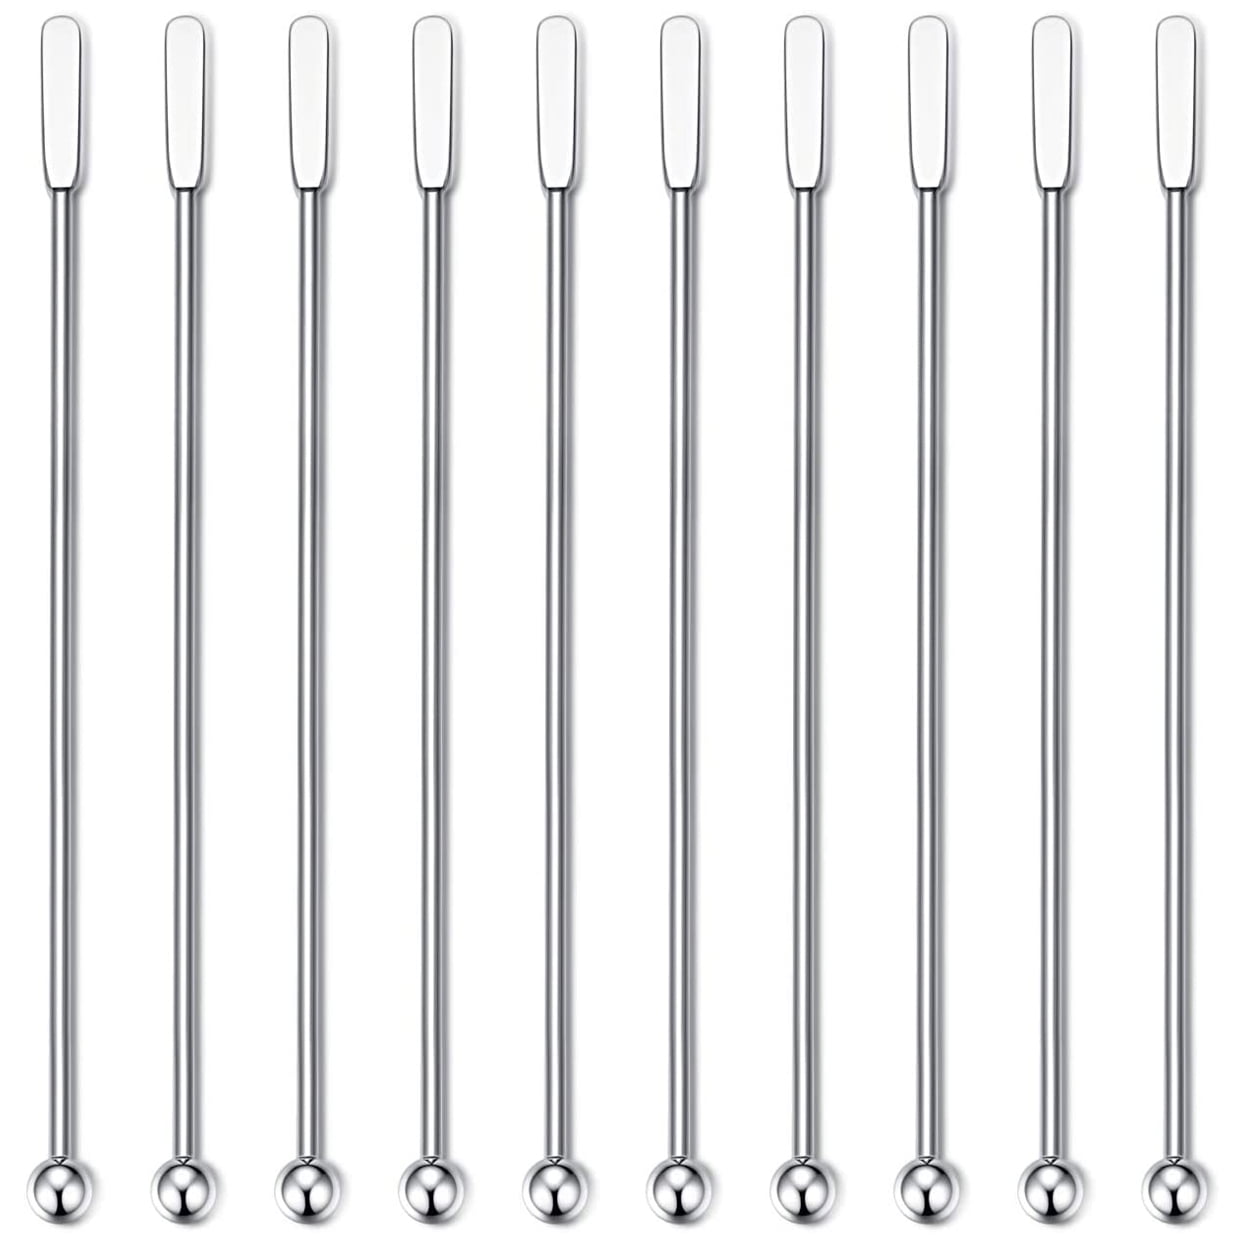 Stainless Steel Metal Drinking Swizzle Straw GIFT Cocktail Party Stick 